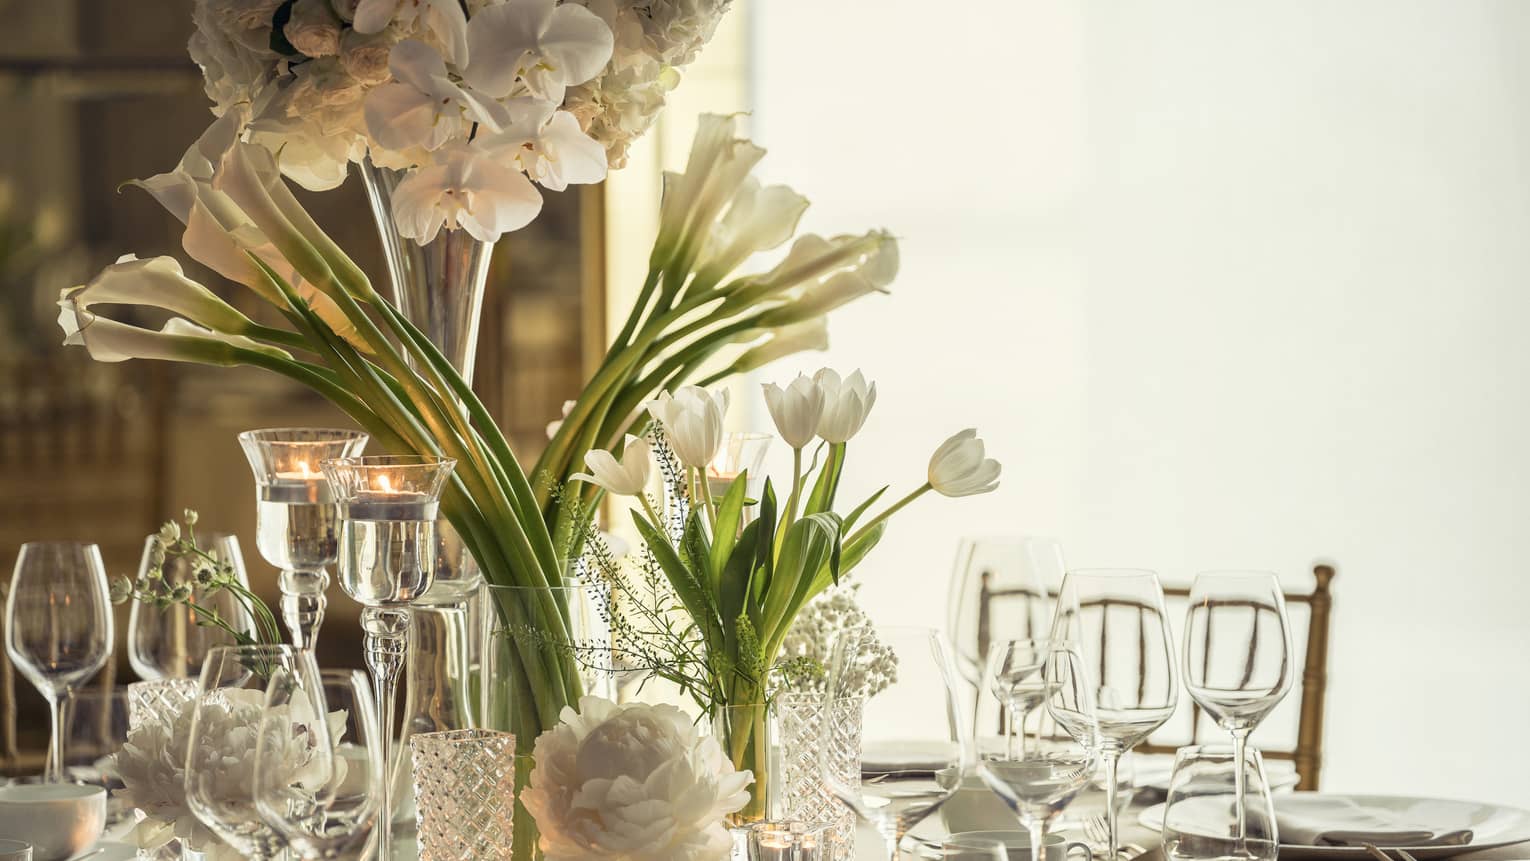 Western Banquet room dining table with glassware, long stemmed white flowers in vase